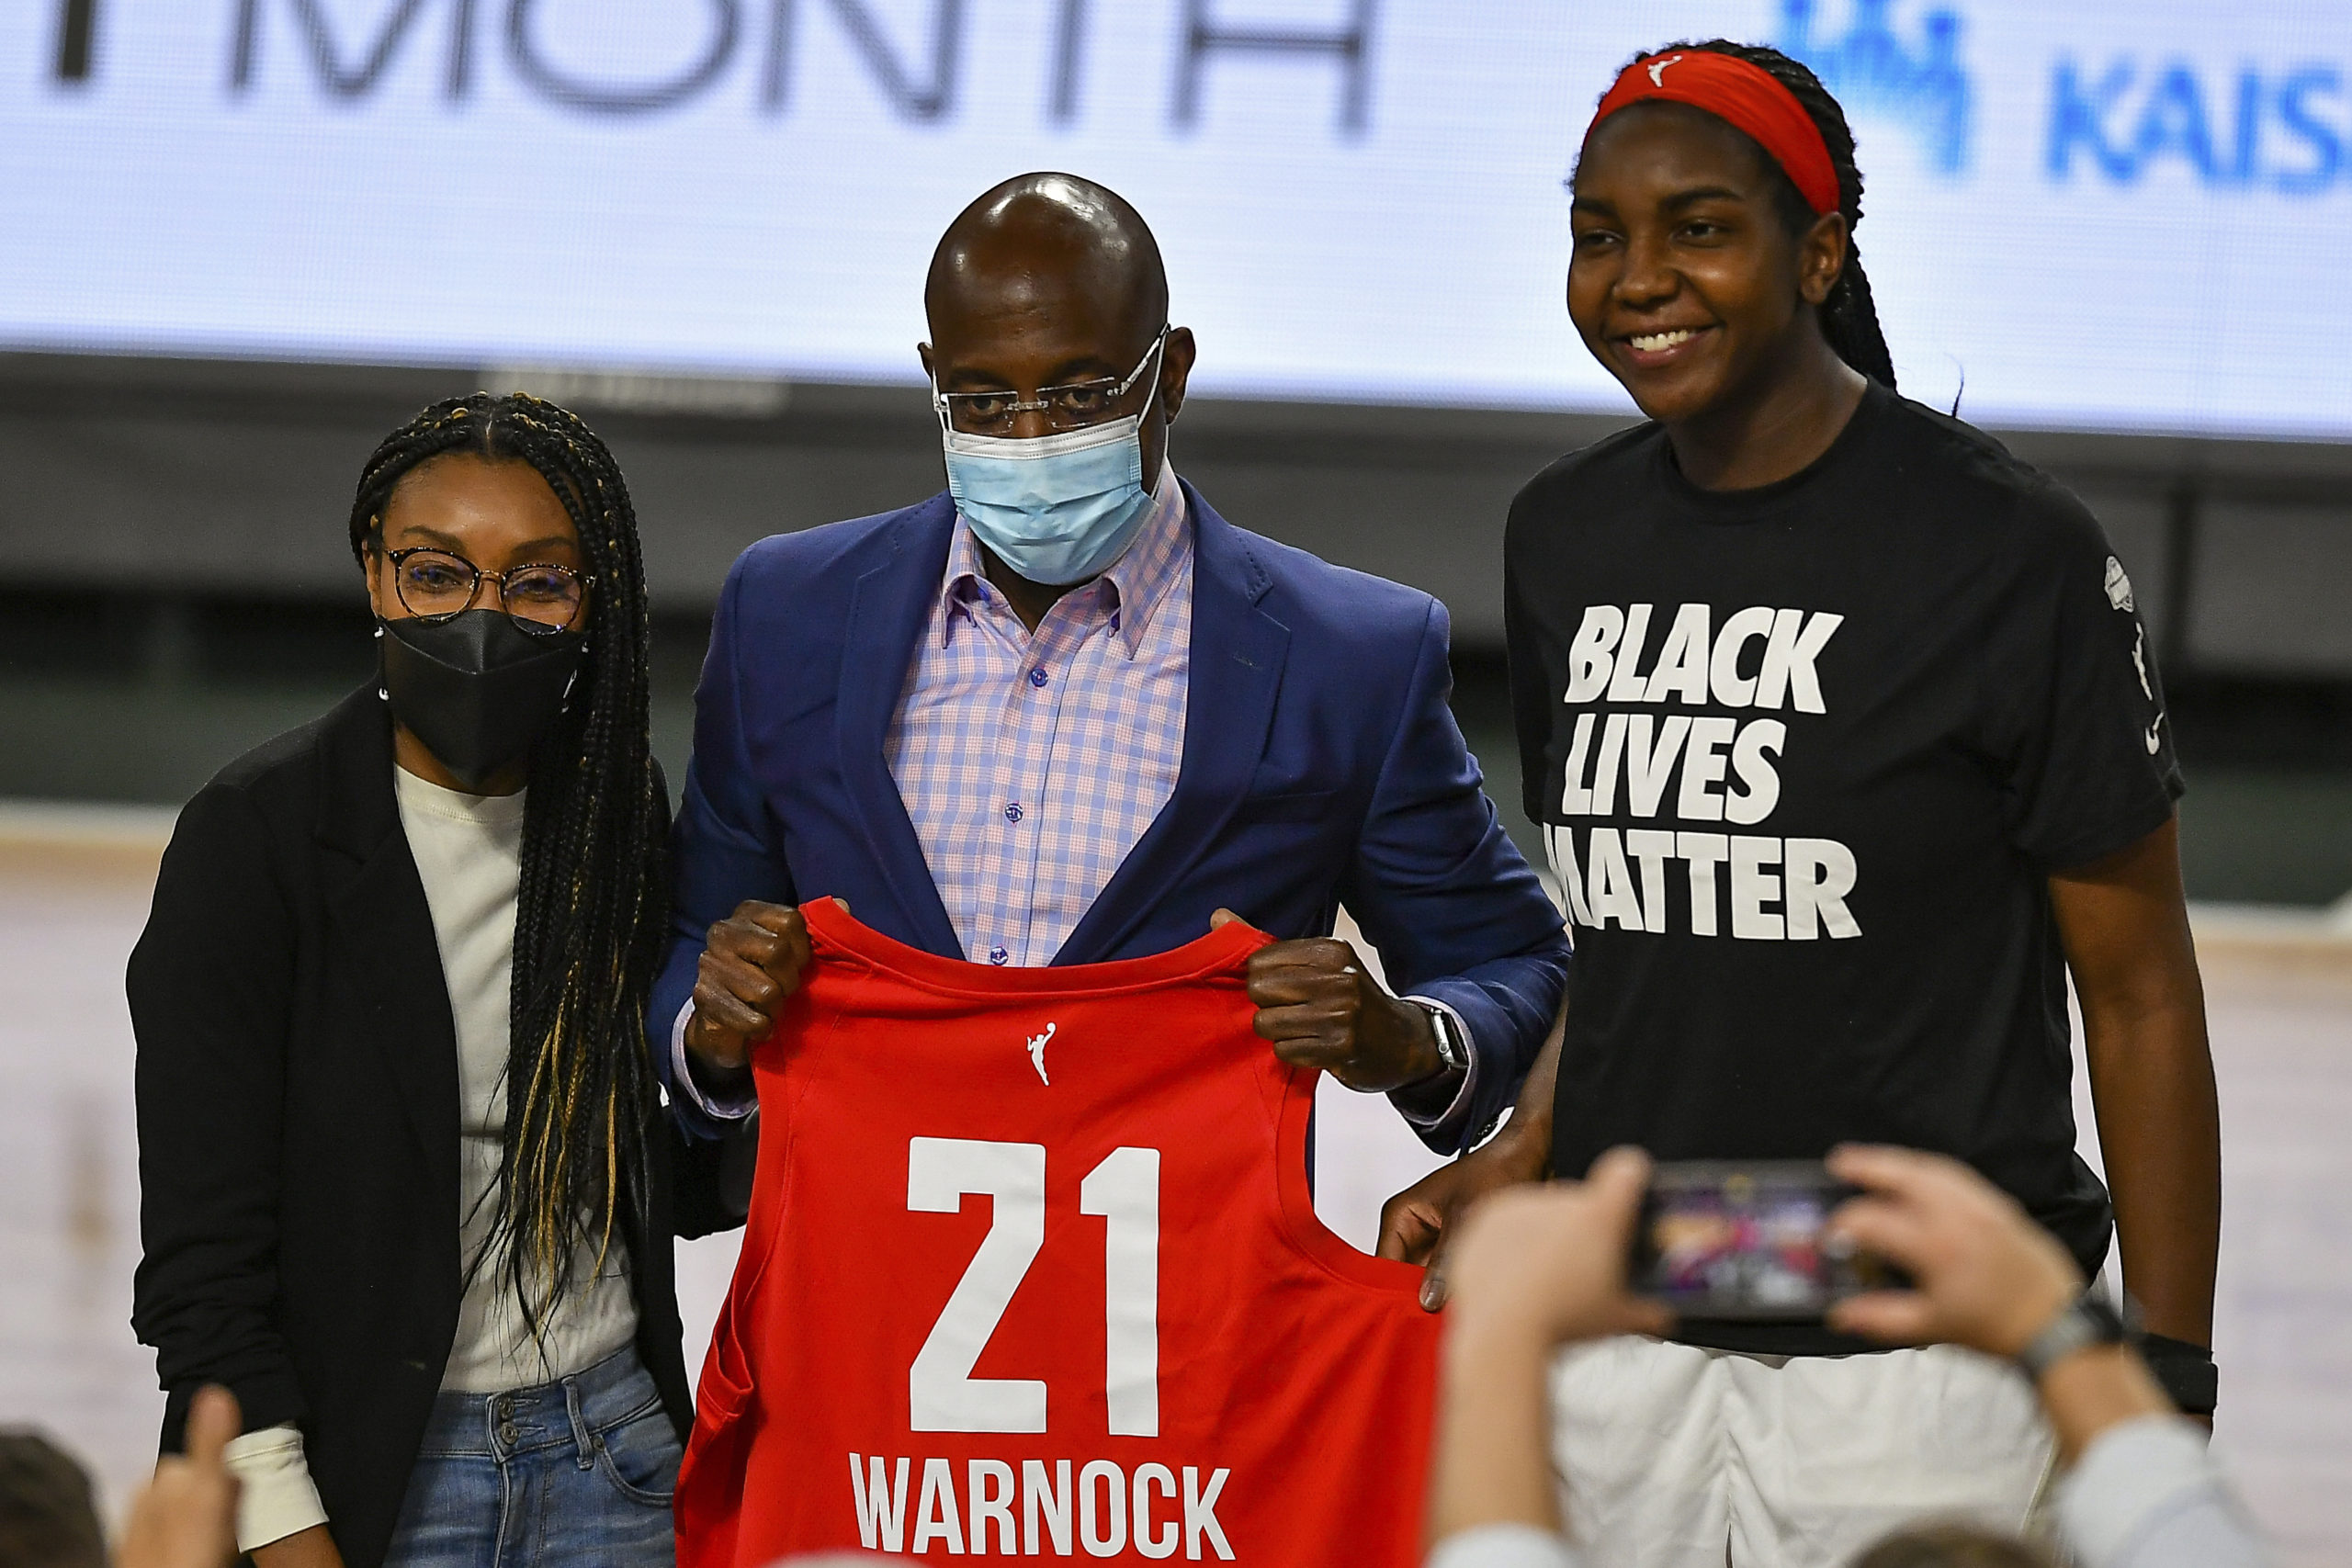 US Senator Raphael Warnock receives a jersey from Atlanta's Elizabeth Williams (1) at halftime during the WNBA game between the Phoenix Mercury and the Atlanta Dream on Aug. 21, 2021 at Gateway Center Arena in College Park, GA